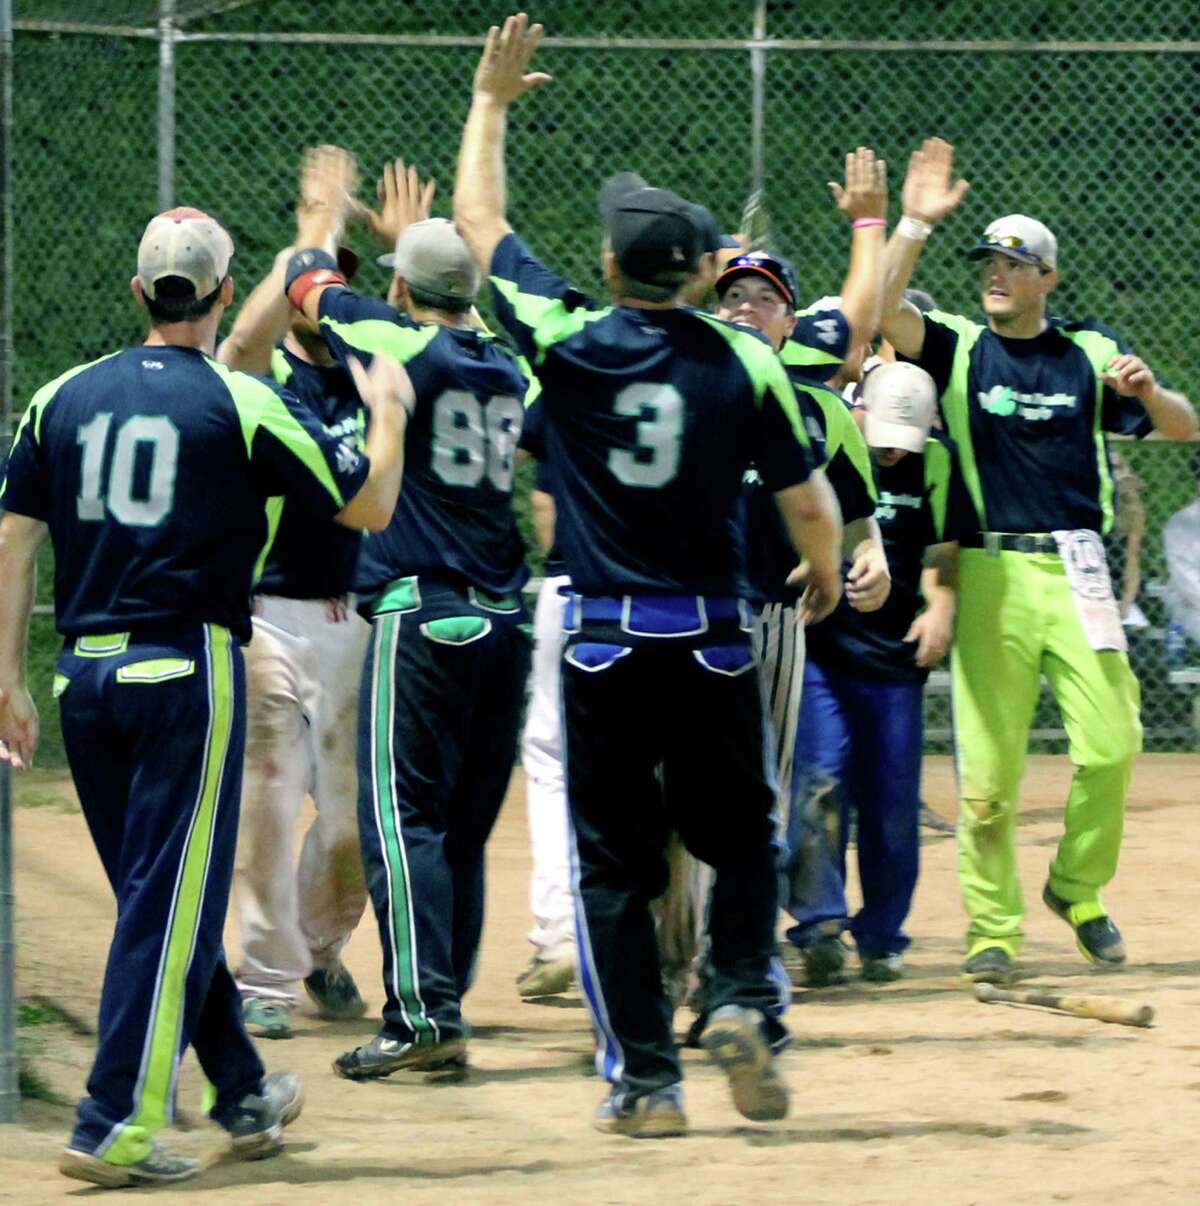 The Modern Plumbing men's softball team did plenty of celebrating during its perfect 2013 New Milford Parks & Recreation's 'A' division season. Above, plumbers including Rob Colburn (3), Steve Schaab (10) and Brett Thompson (88) welcome Ronnie Newkirk, amidst his teammates, following his three-run homer during Modern's 11-4 playoff title clincher at Young's Field. August 2013 Courtesy of Kennie Olson